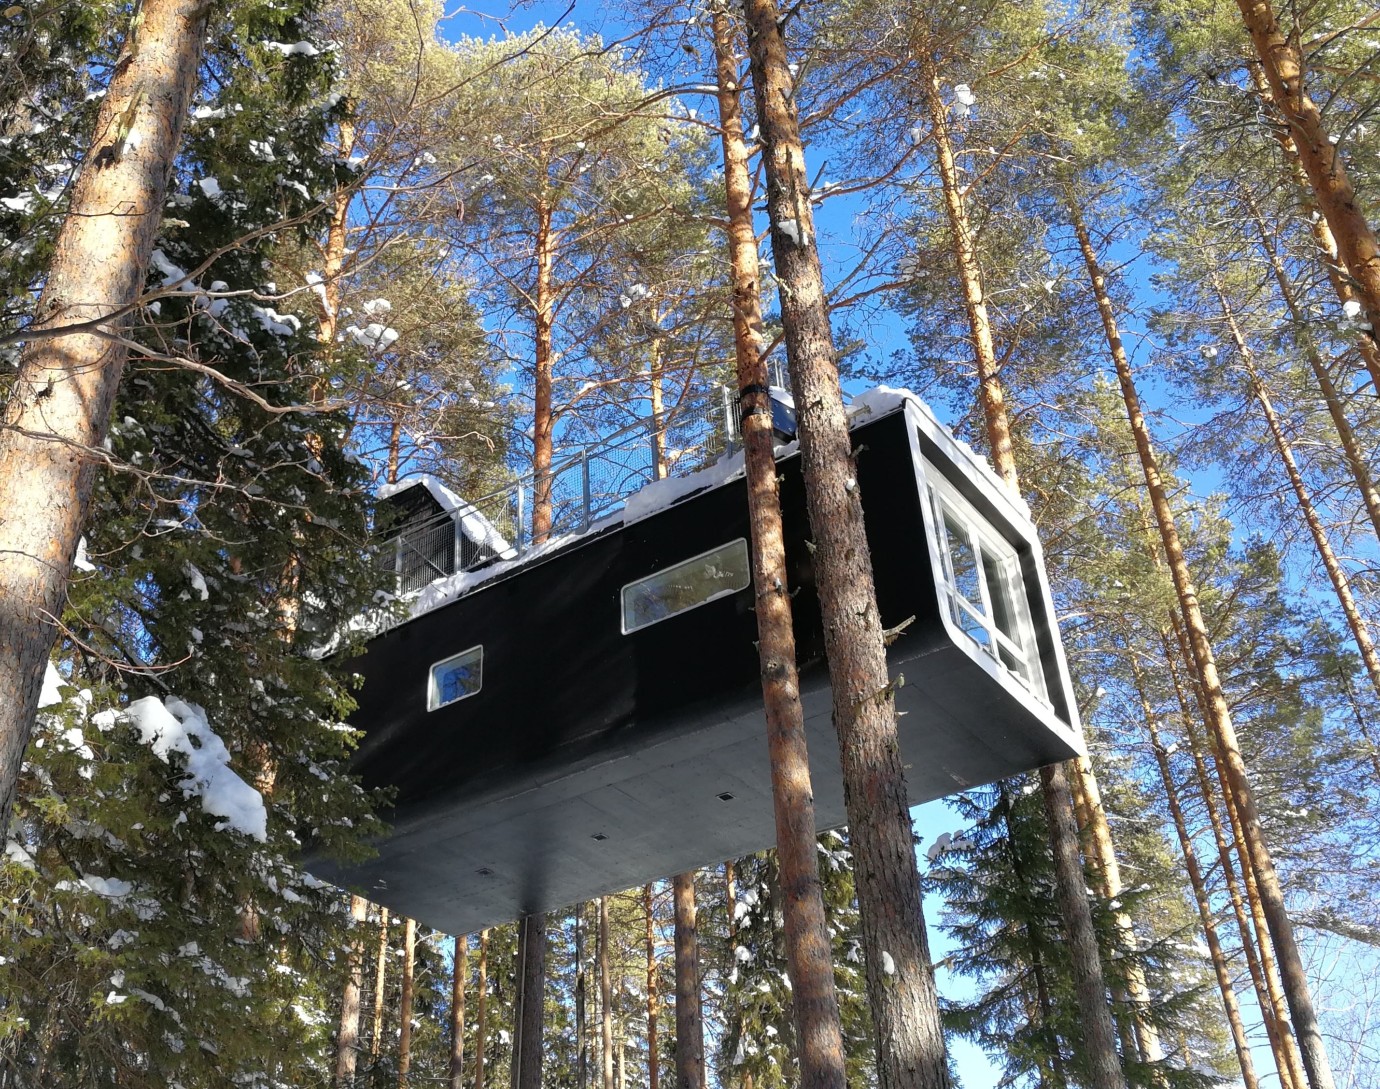 Treehotel - "the Cabin"